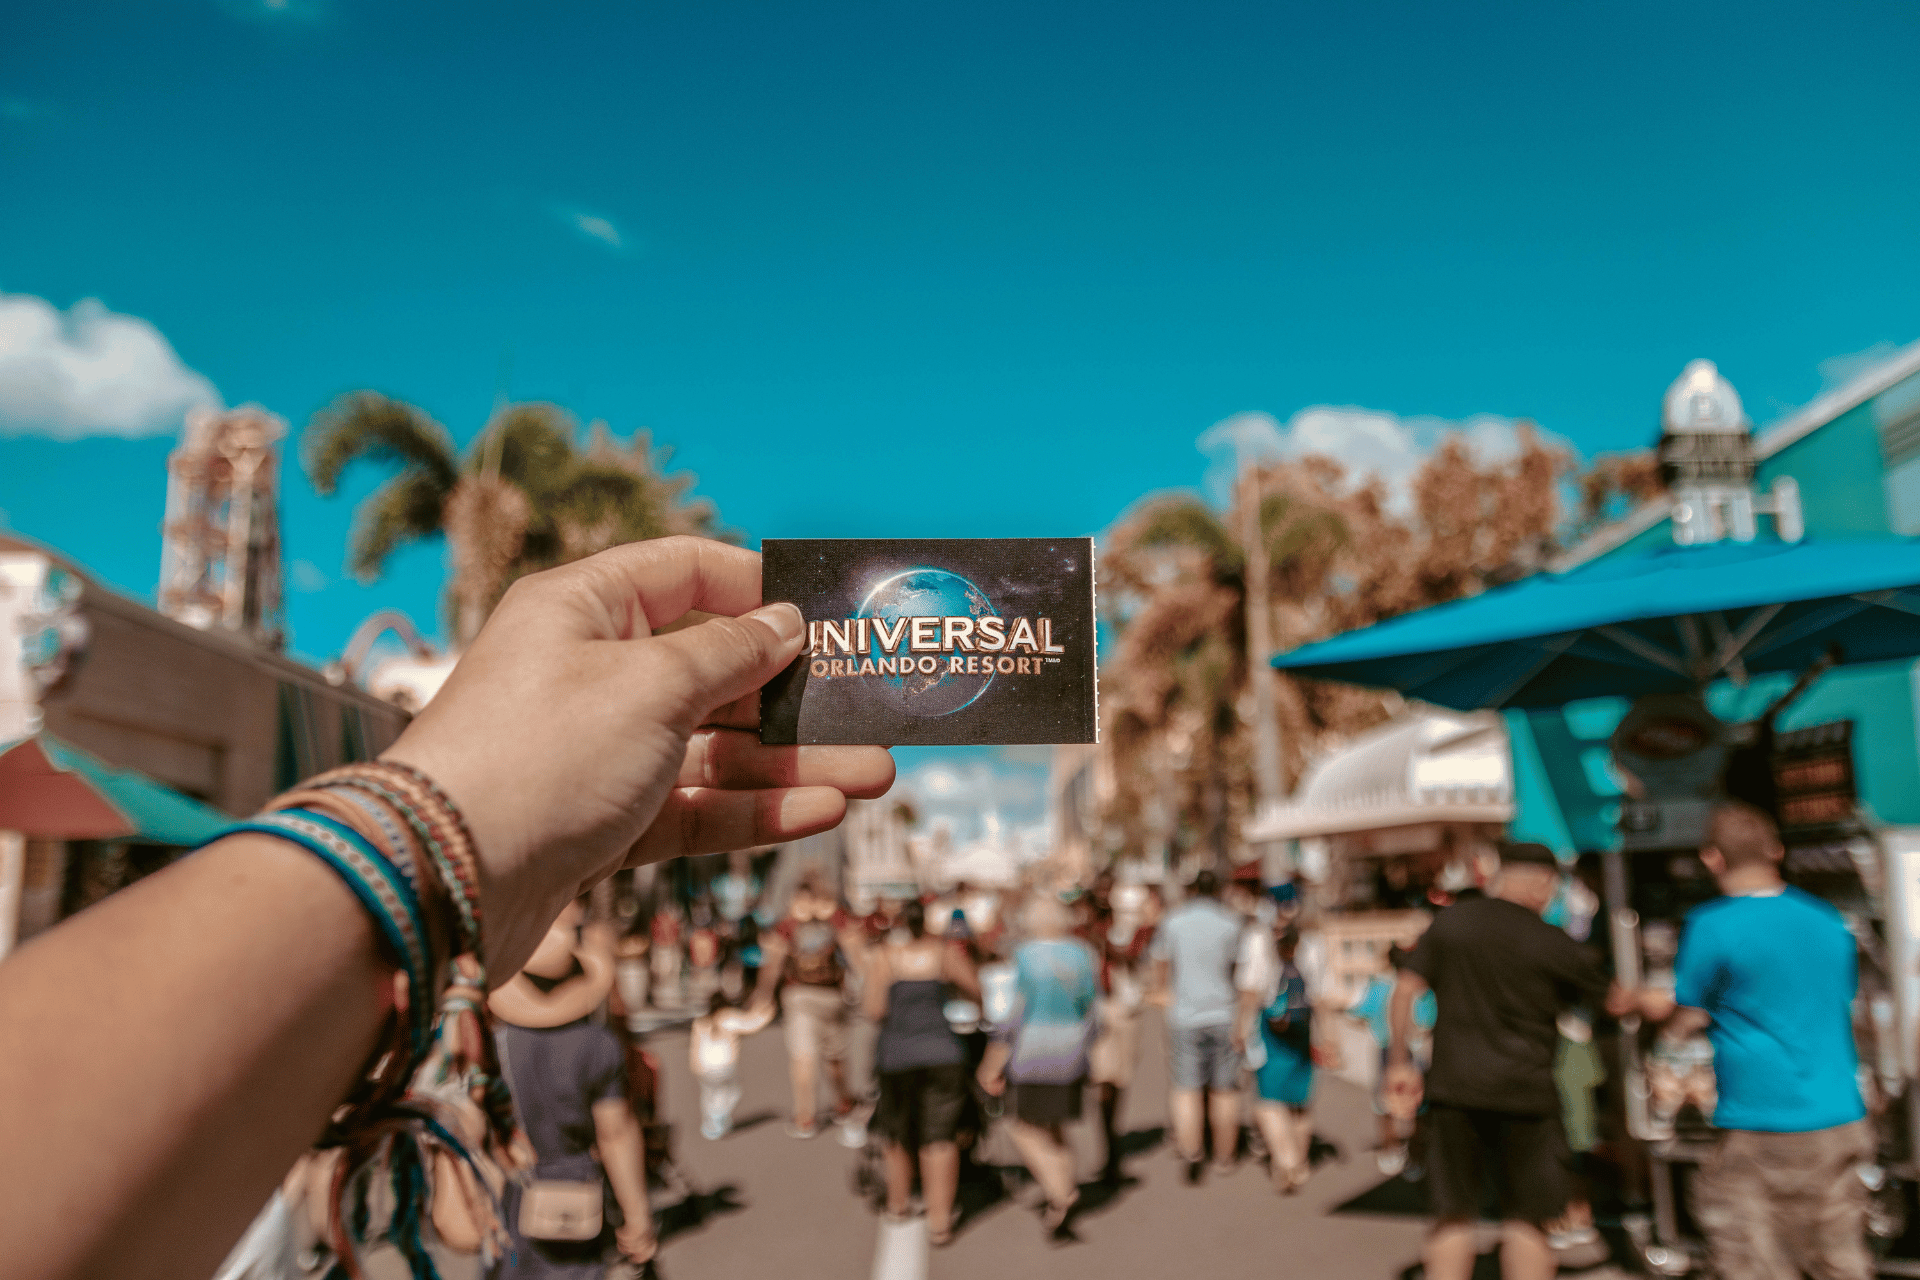 A visitor at Universal Orlando Resort showing their ticket.